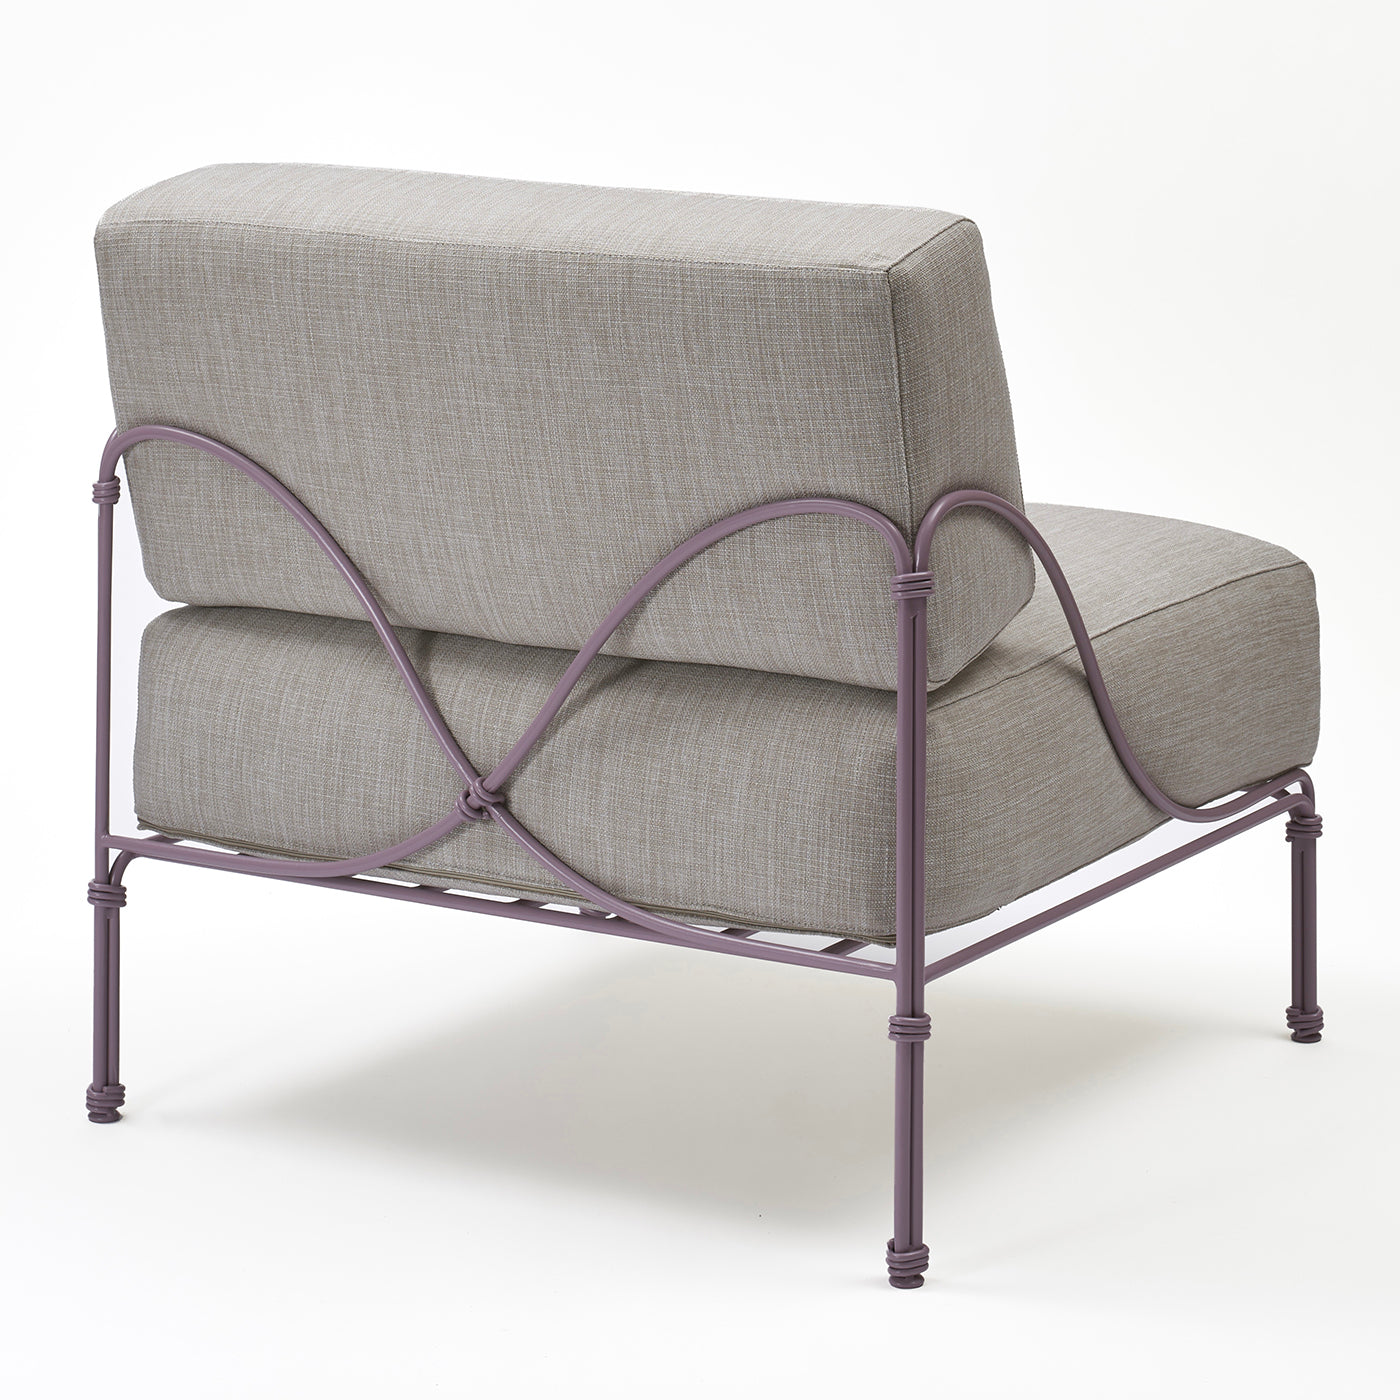 Vitis Lilac and Gray Armchair by Ciarmroli Queda Studio in Stainless Steel - Alternative view 2